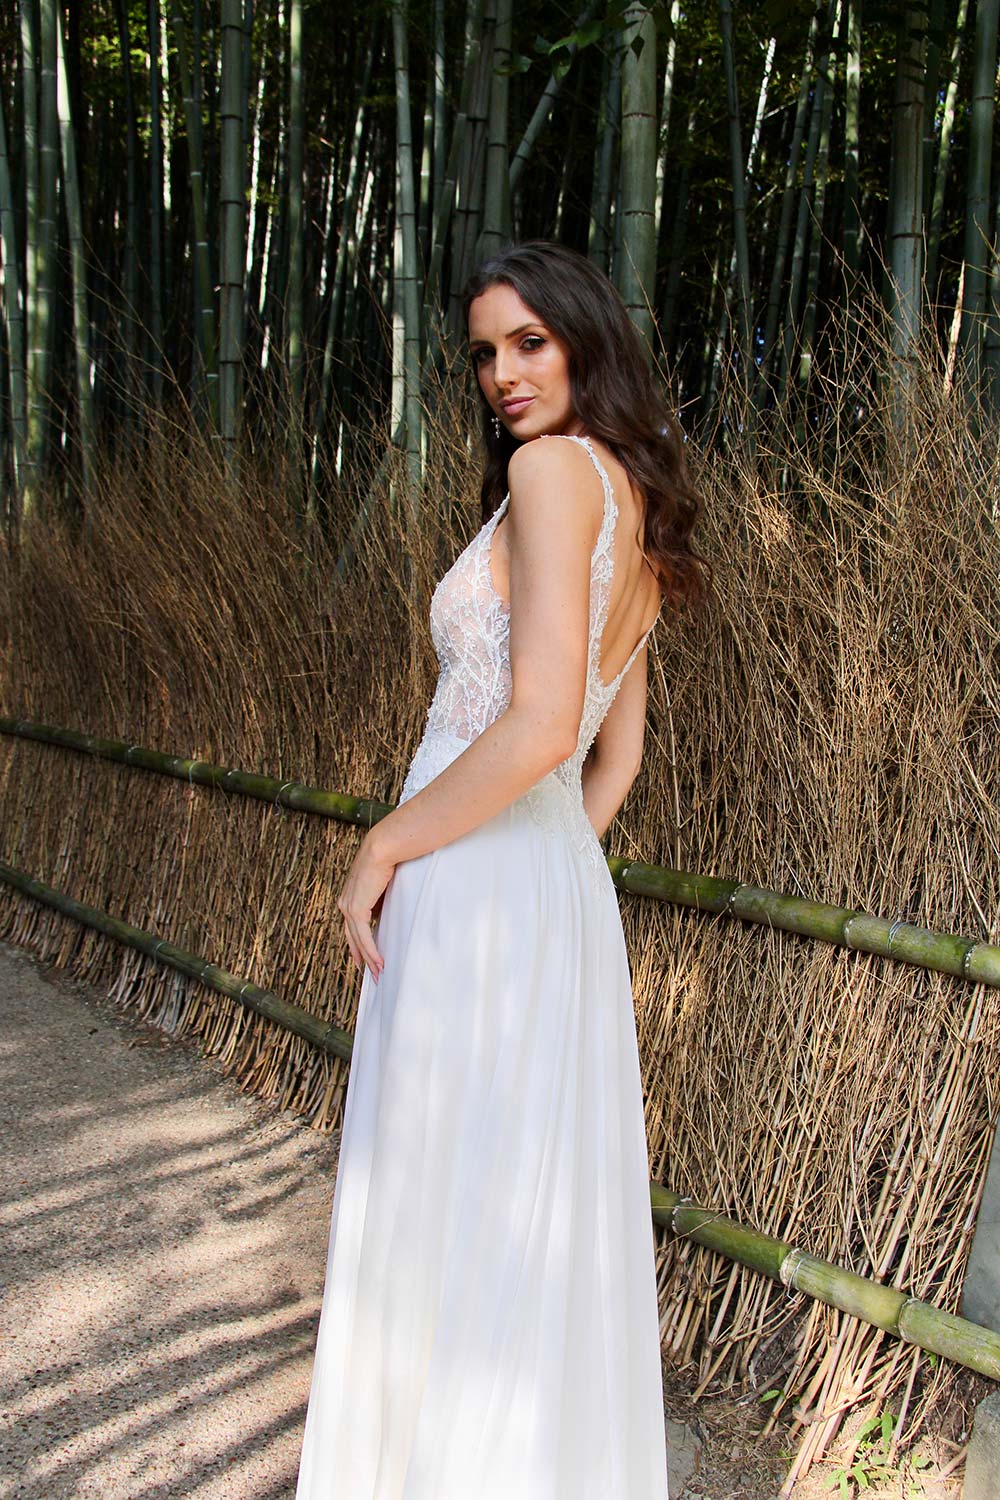 Female model wearing Vinka Design An Oriental Affair Wedding Dress. In a Japanese bamboo forest the side detail of a gown with a bodice of two beaded laces on a nude base and a silk chiffon skirt with side split.